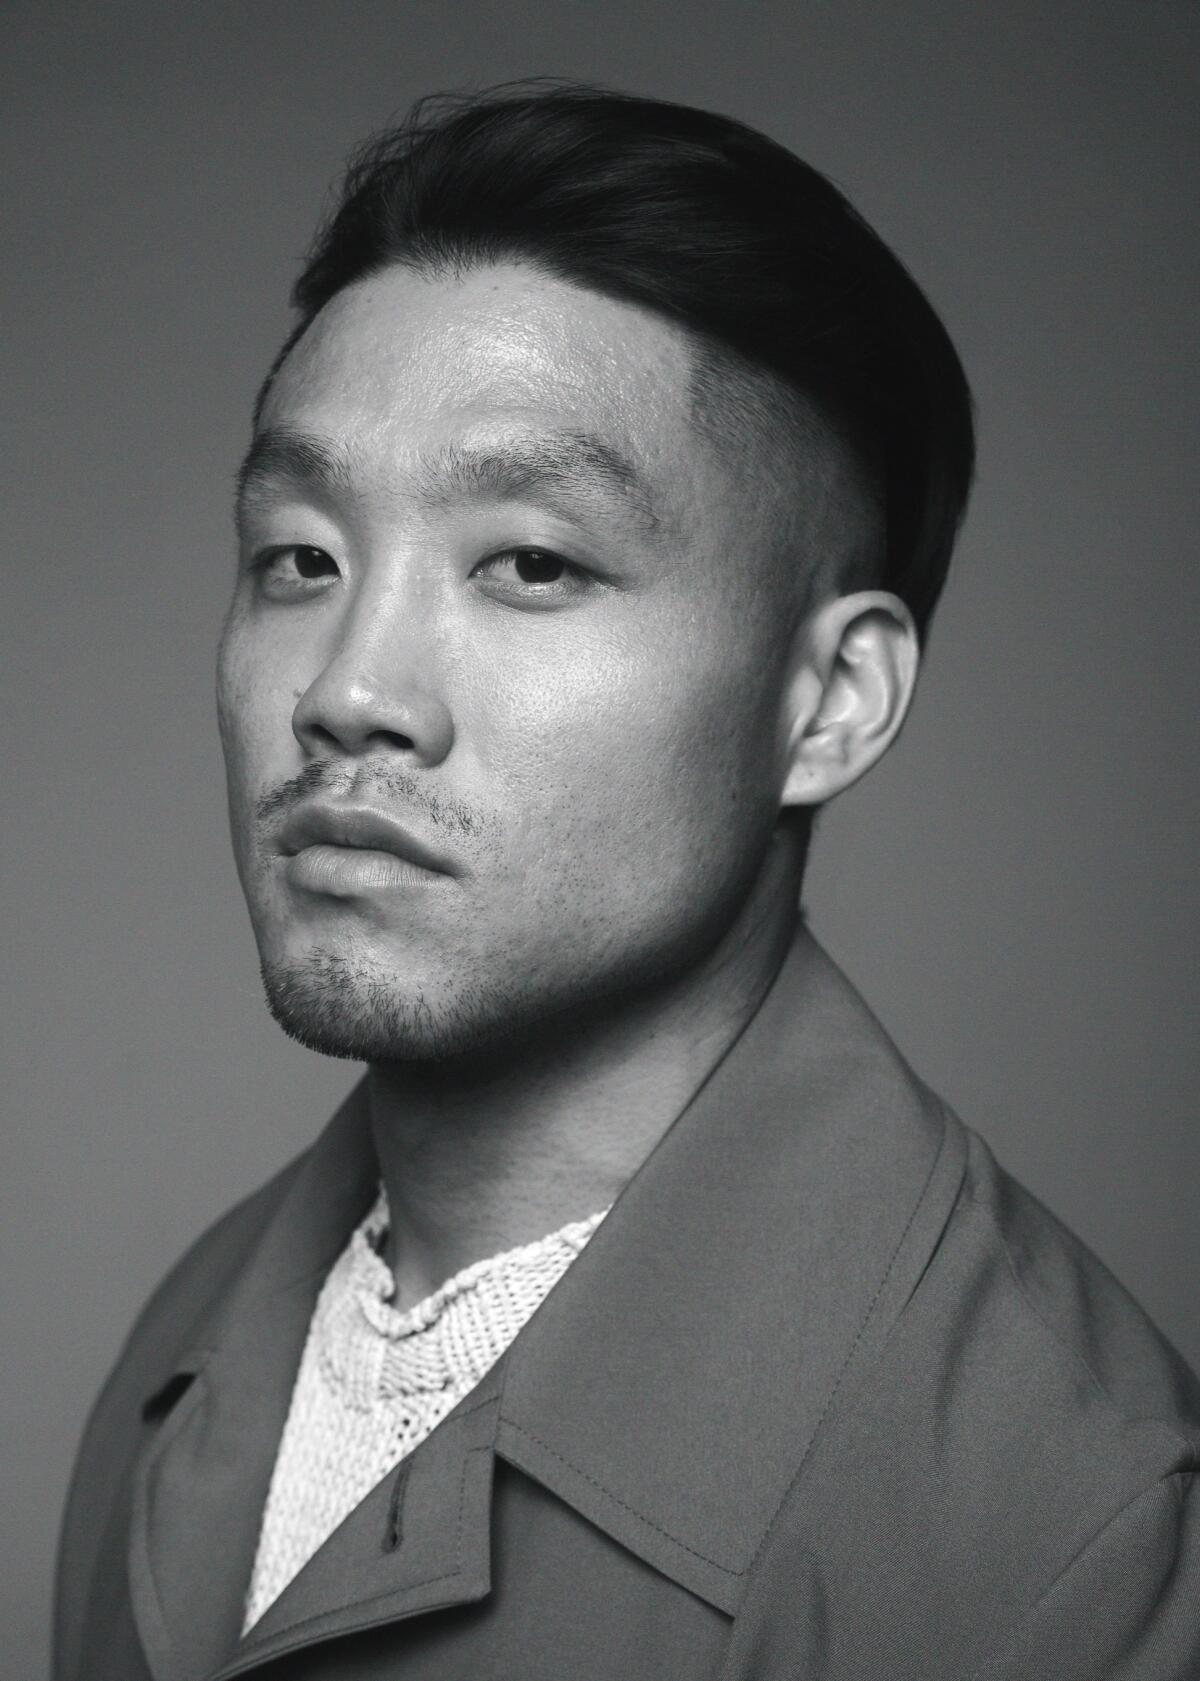 Actor Taylor Takahashi will keynote UC San Diego's “Empowering Community Through Reflection and Recognition" on May 6.